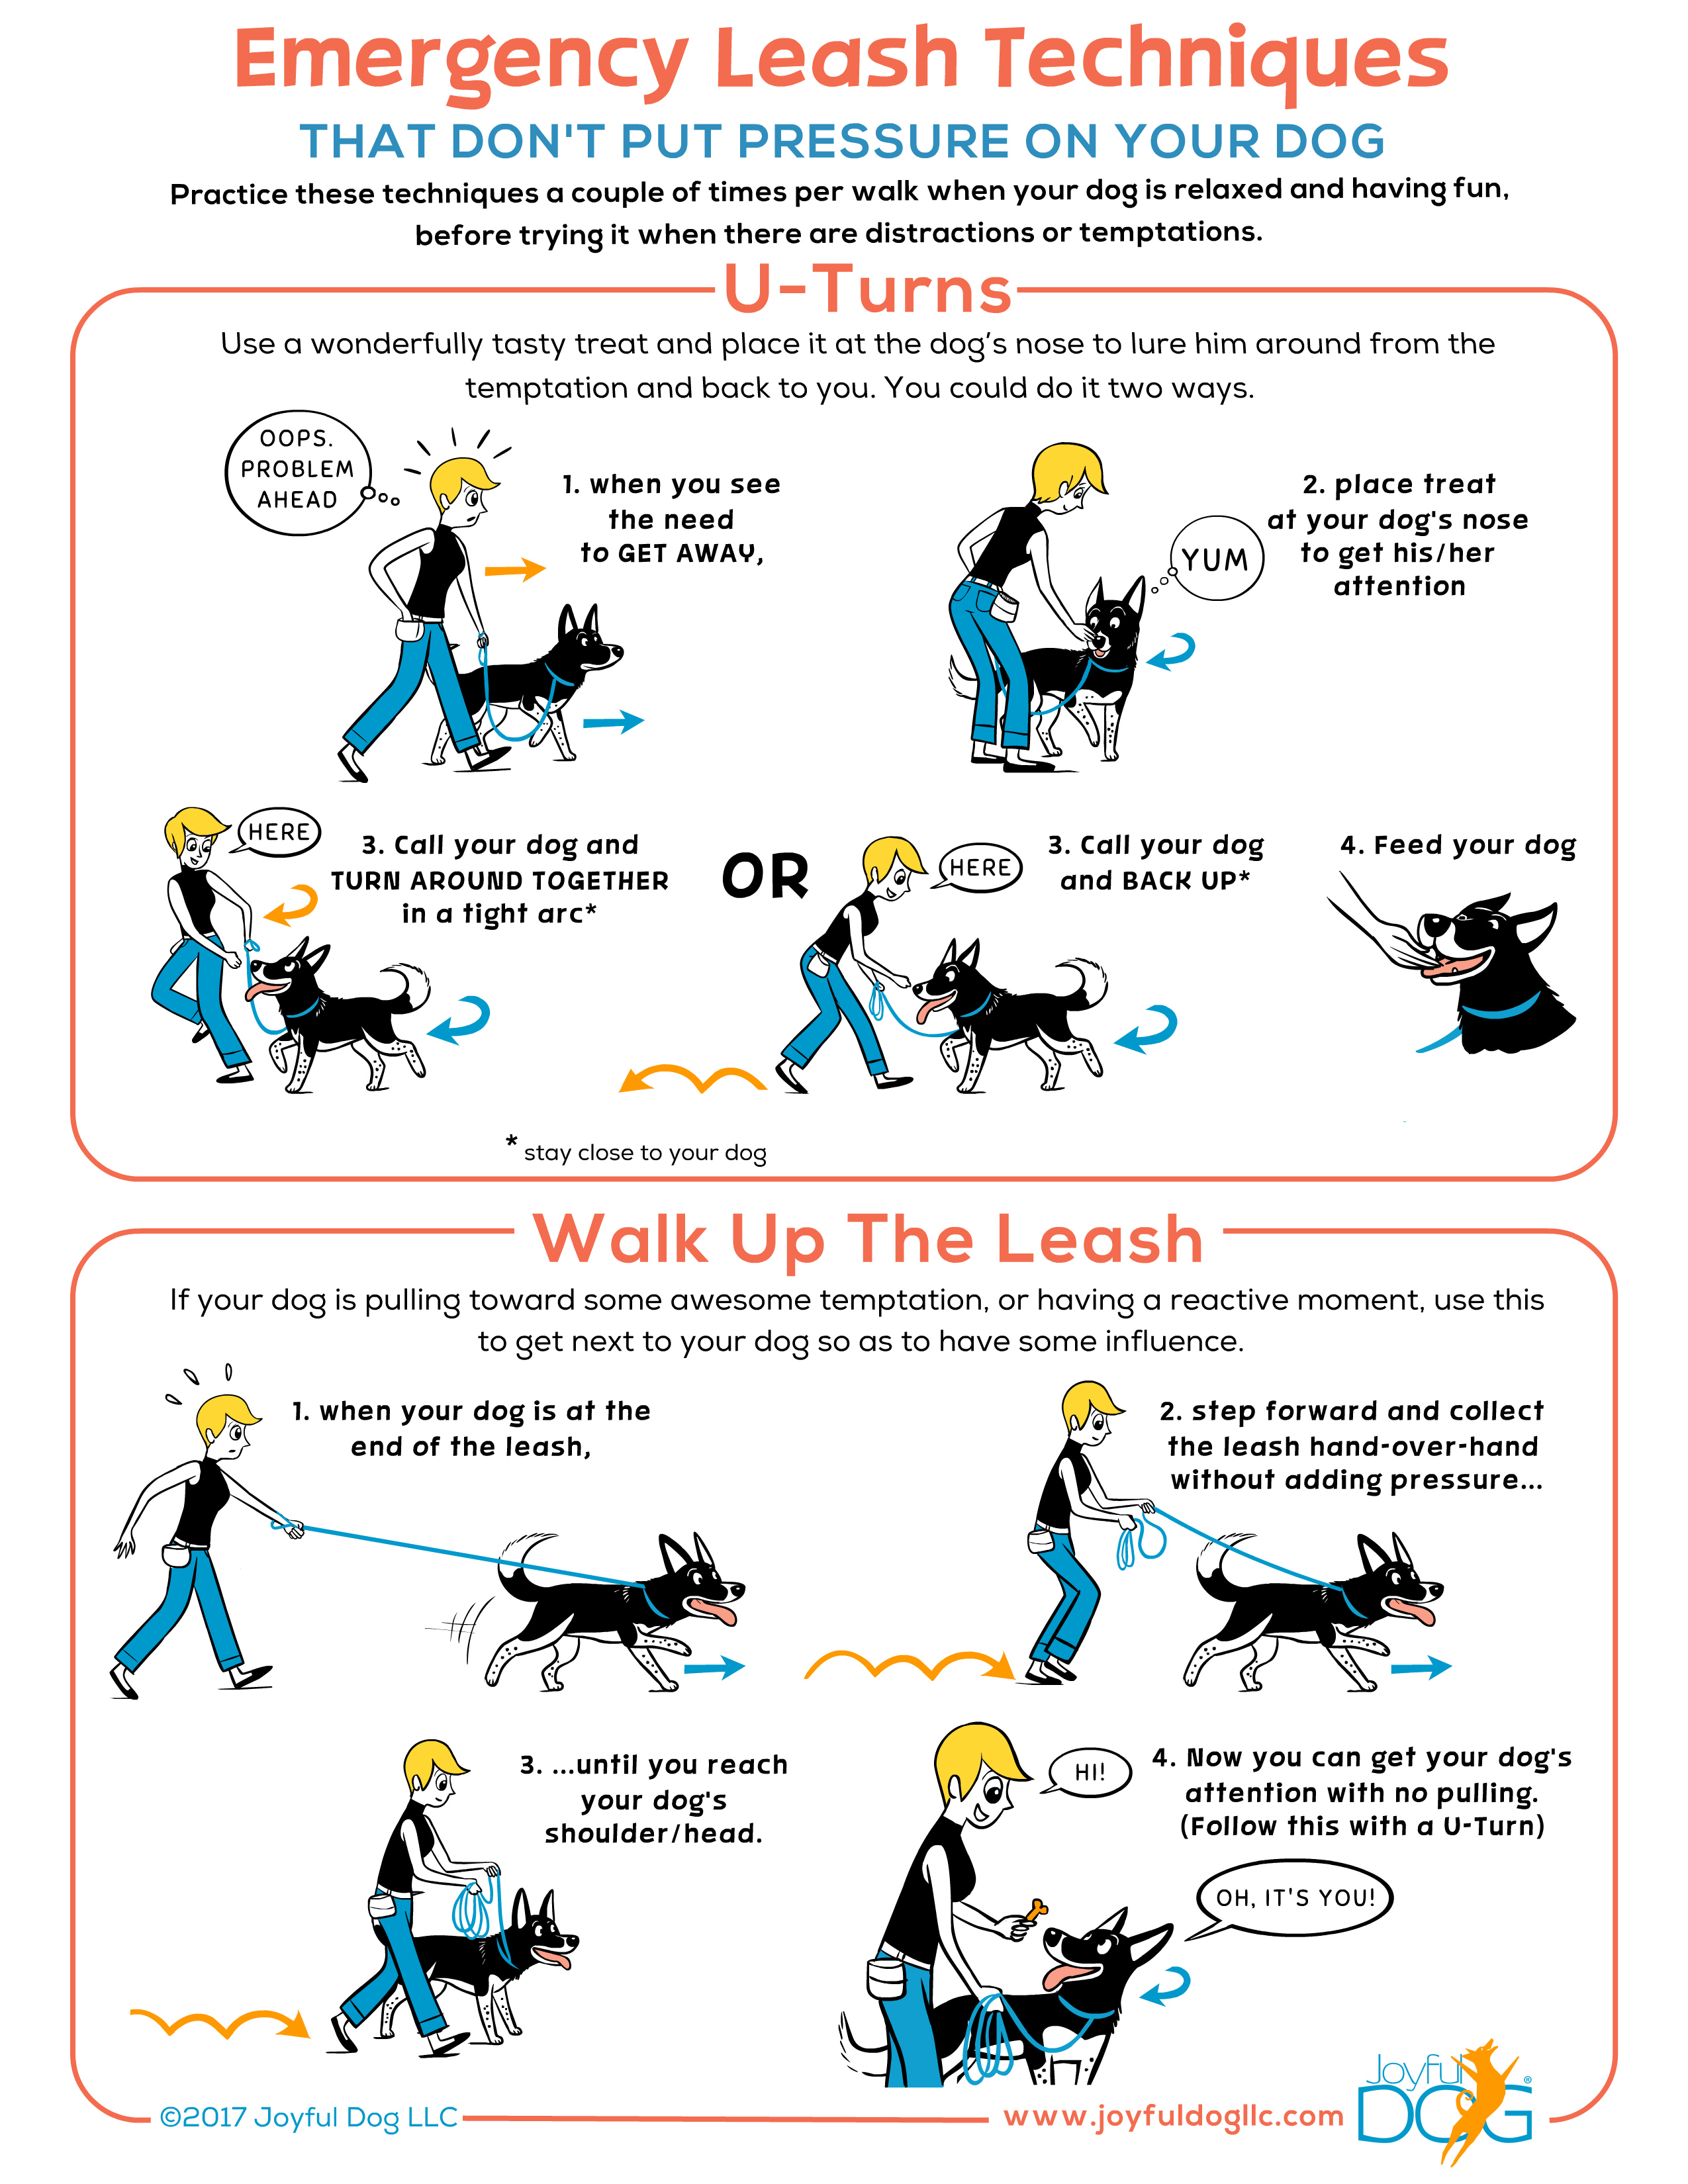 How I Stopped My Dog From Pulling on the Leash - Puppy Leaks